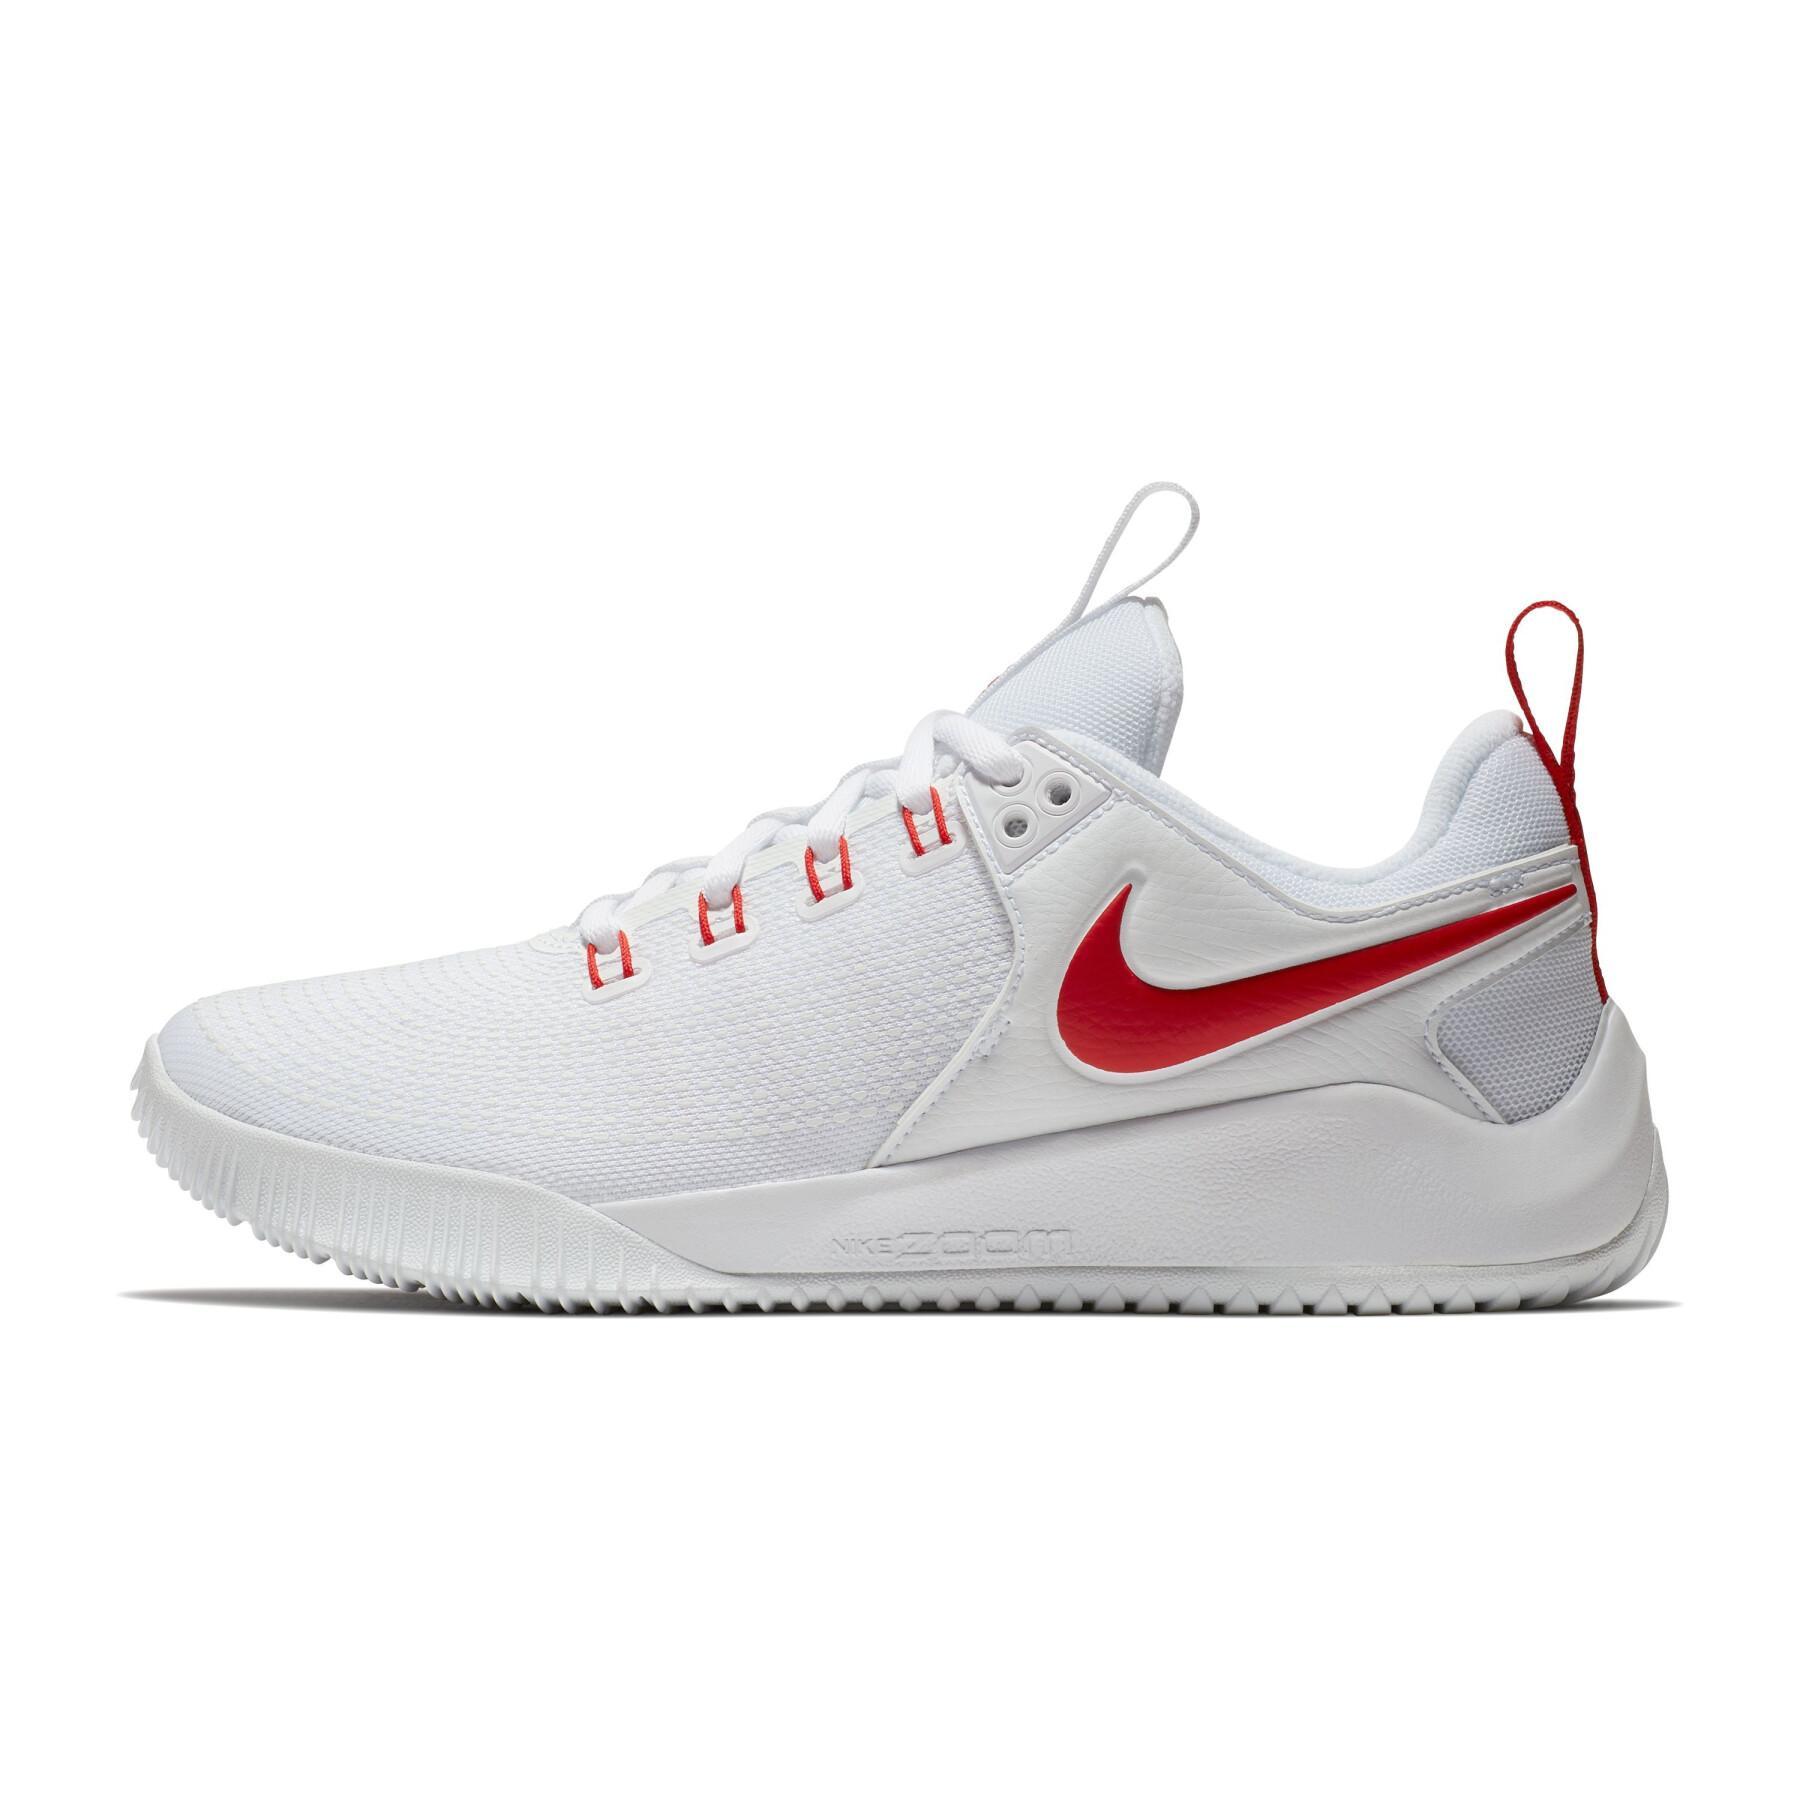 Women's shoes Nike Air Zoom Hyperace 2